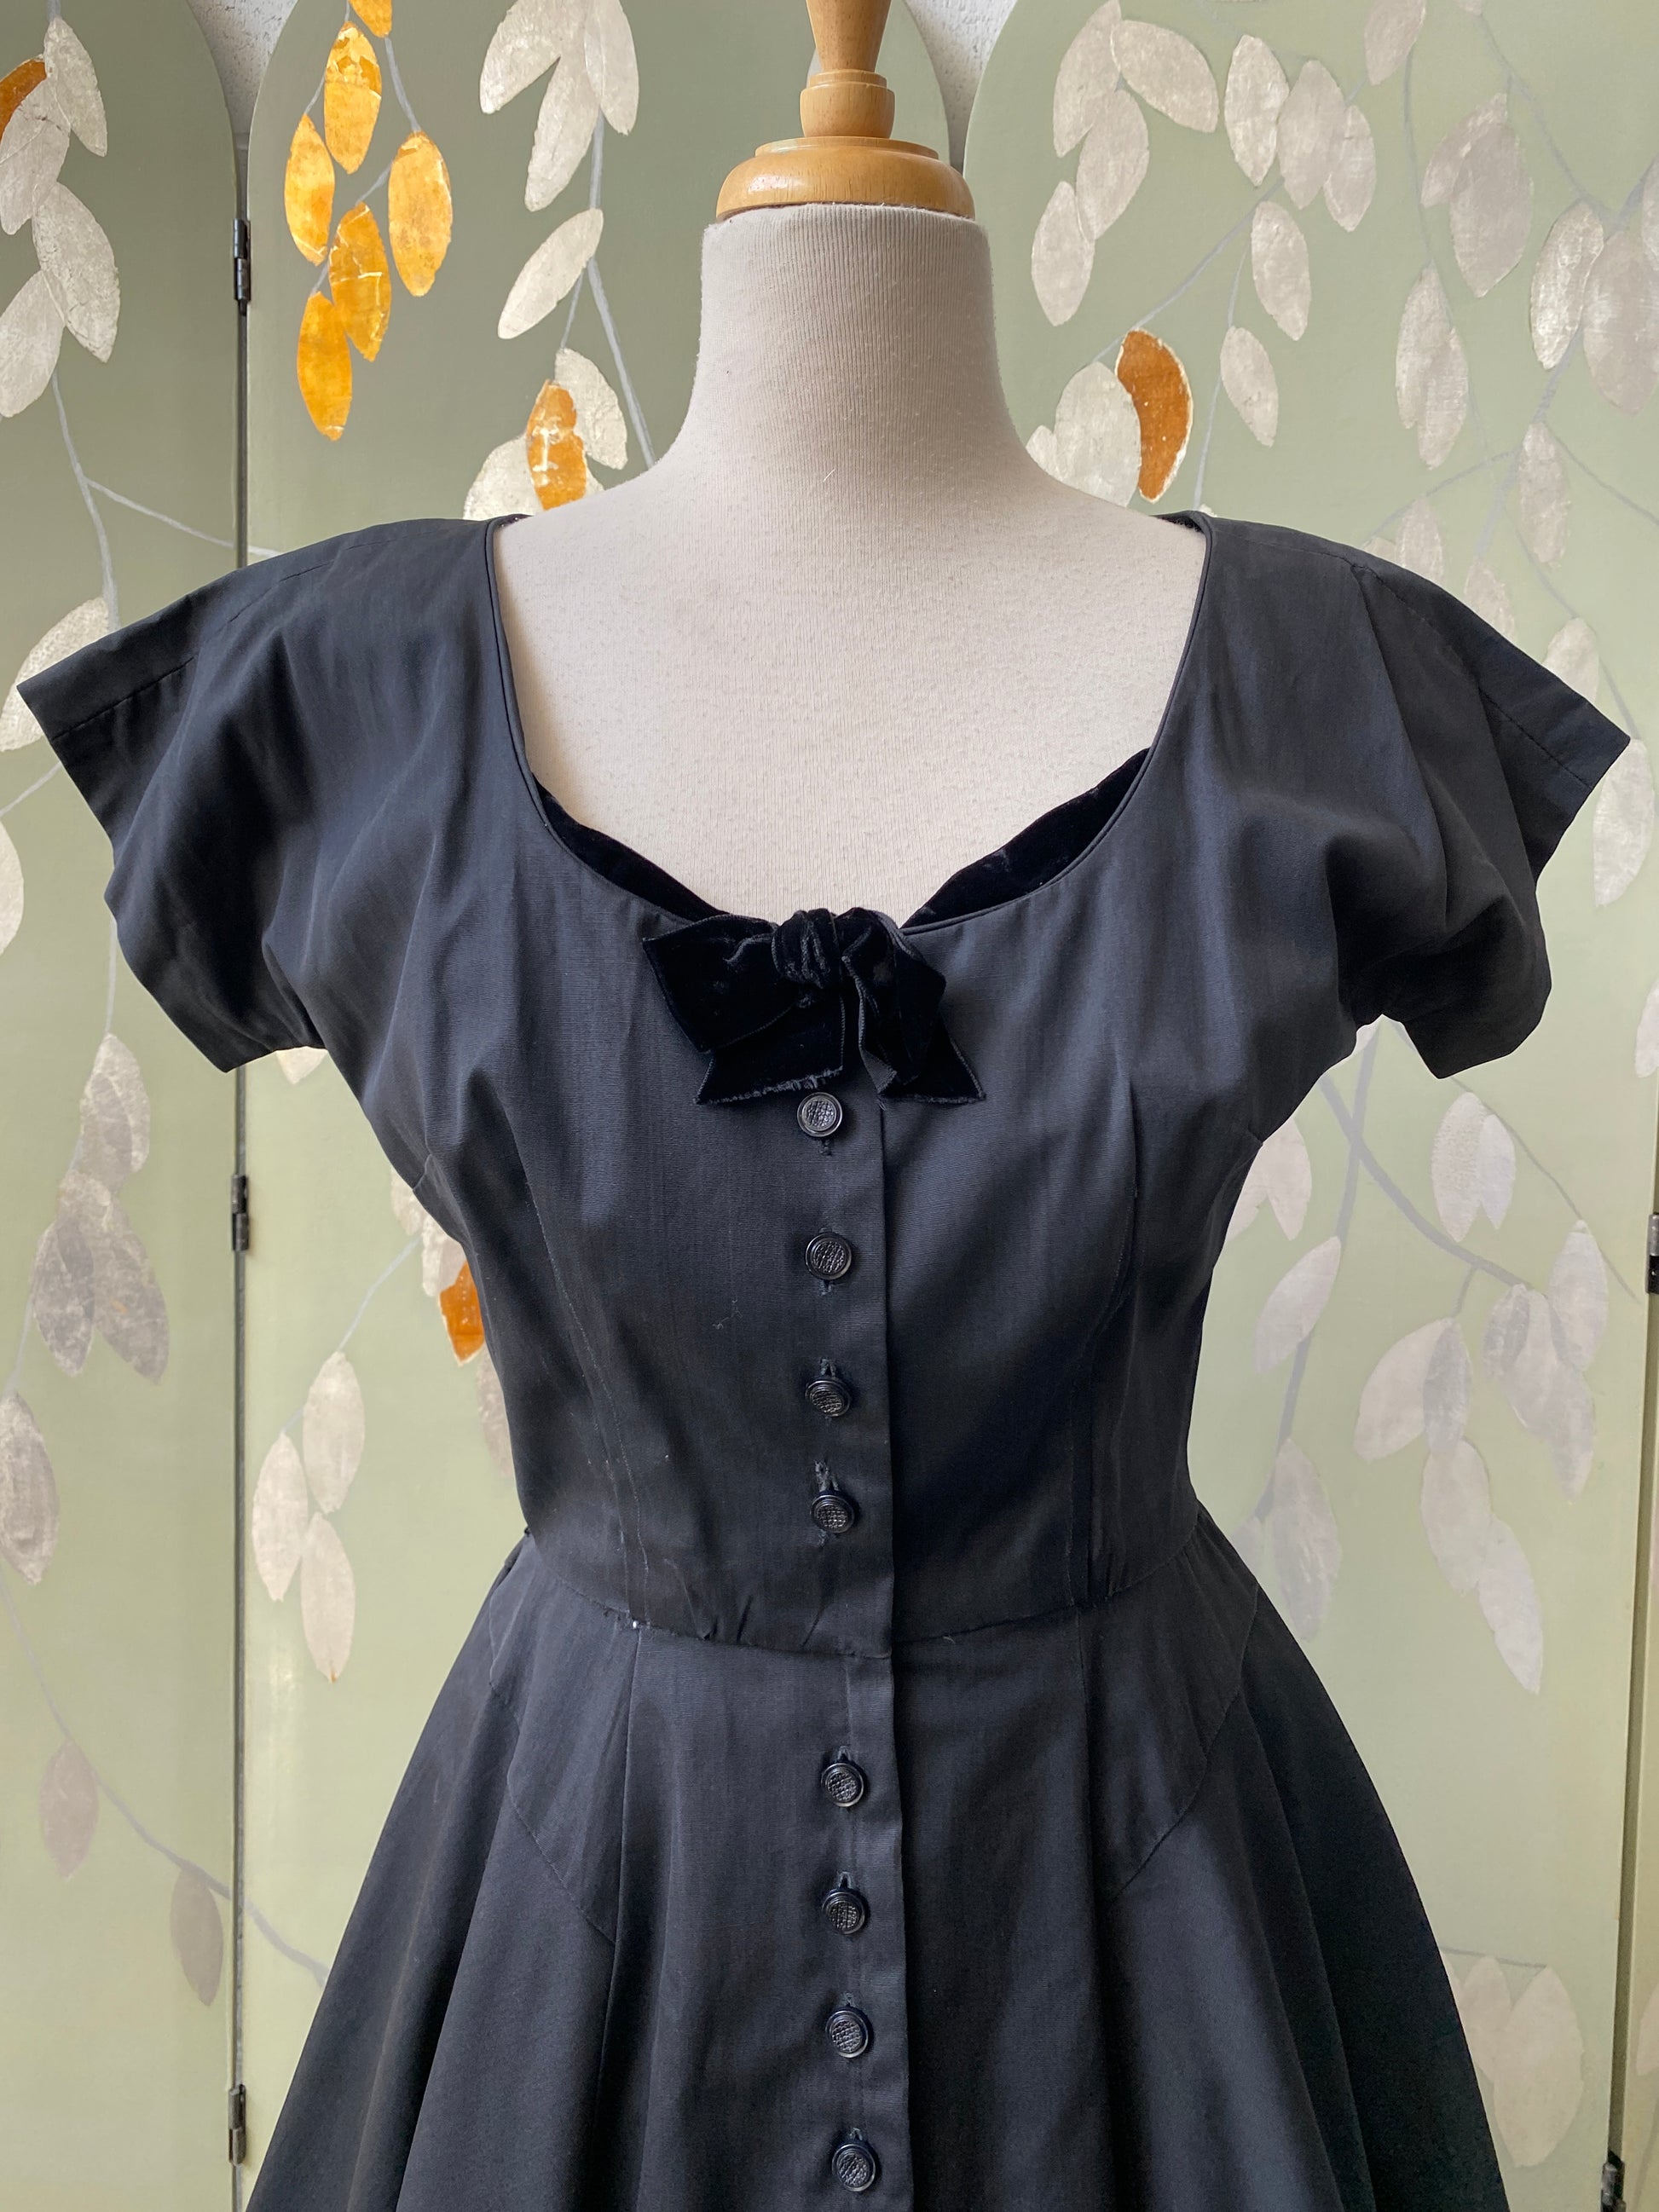 Vintage 1950s Black Bow-Front Short Sleeve Cocktail Dress, Small 